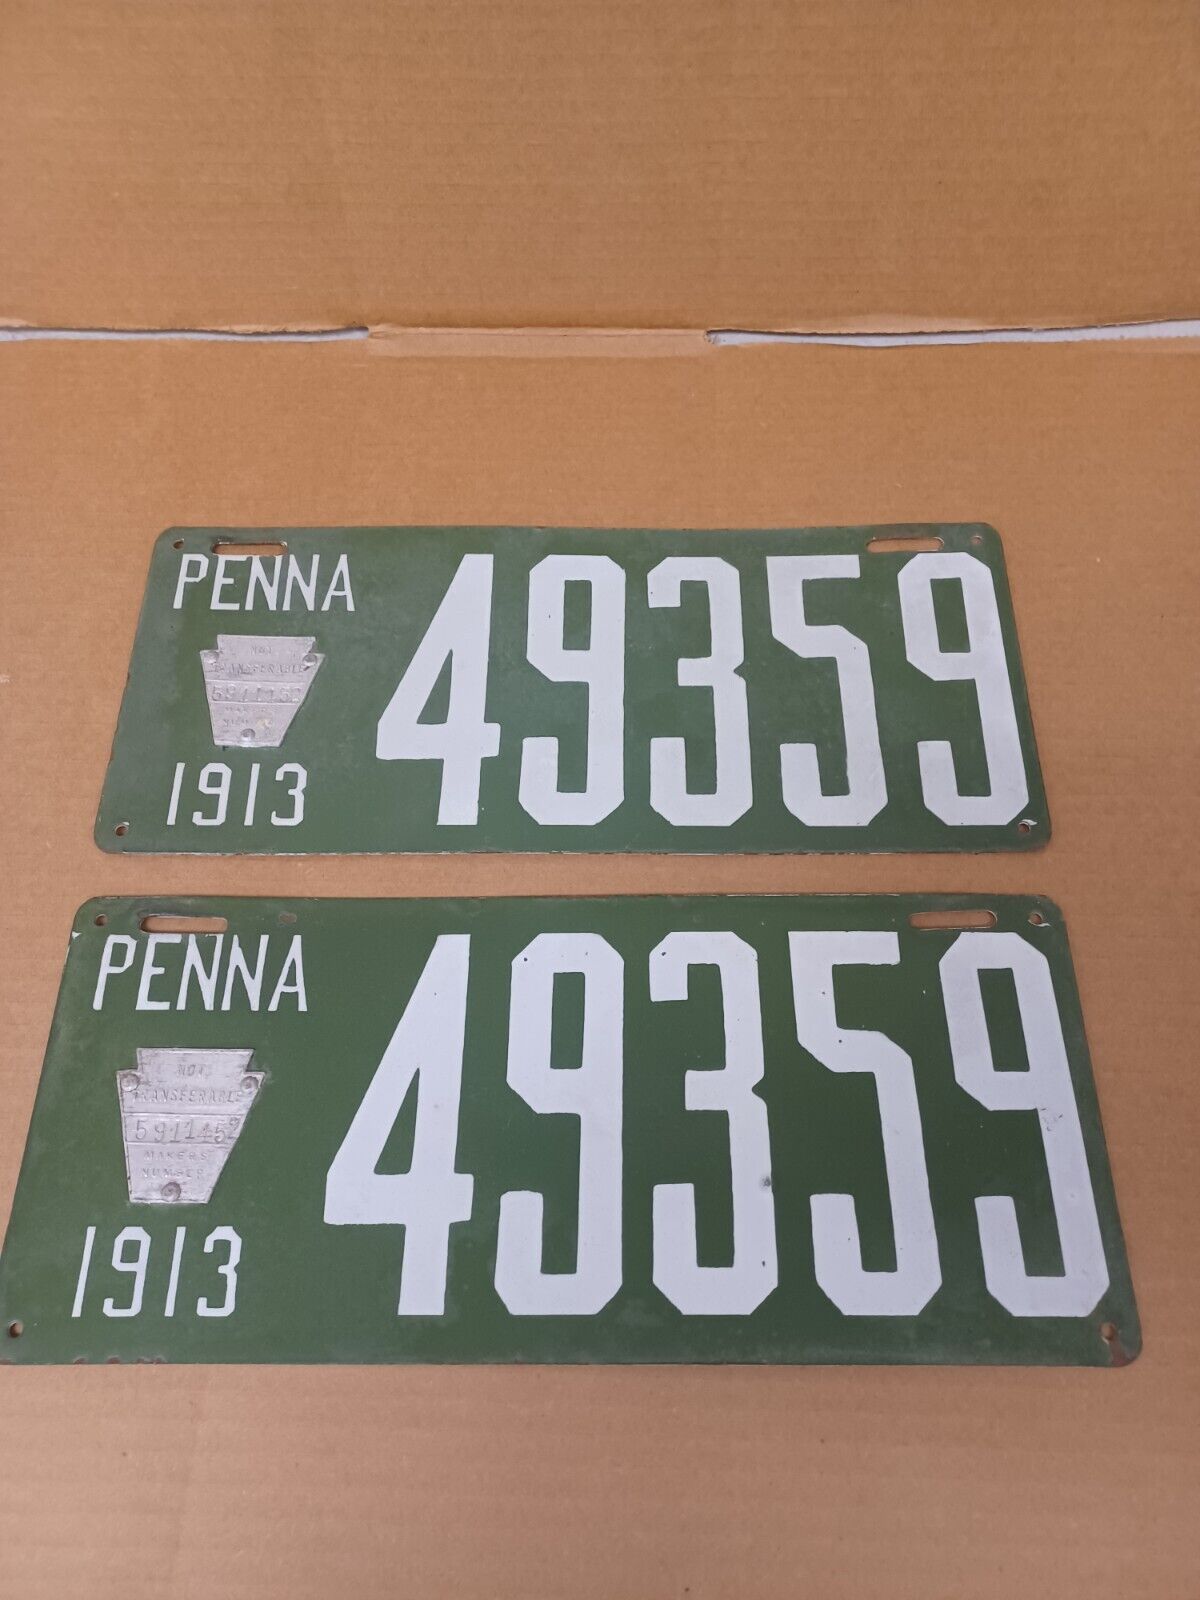 Set of (2) -- 1913 PA Pennsylvania license plate Porcelain -- matching numbers